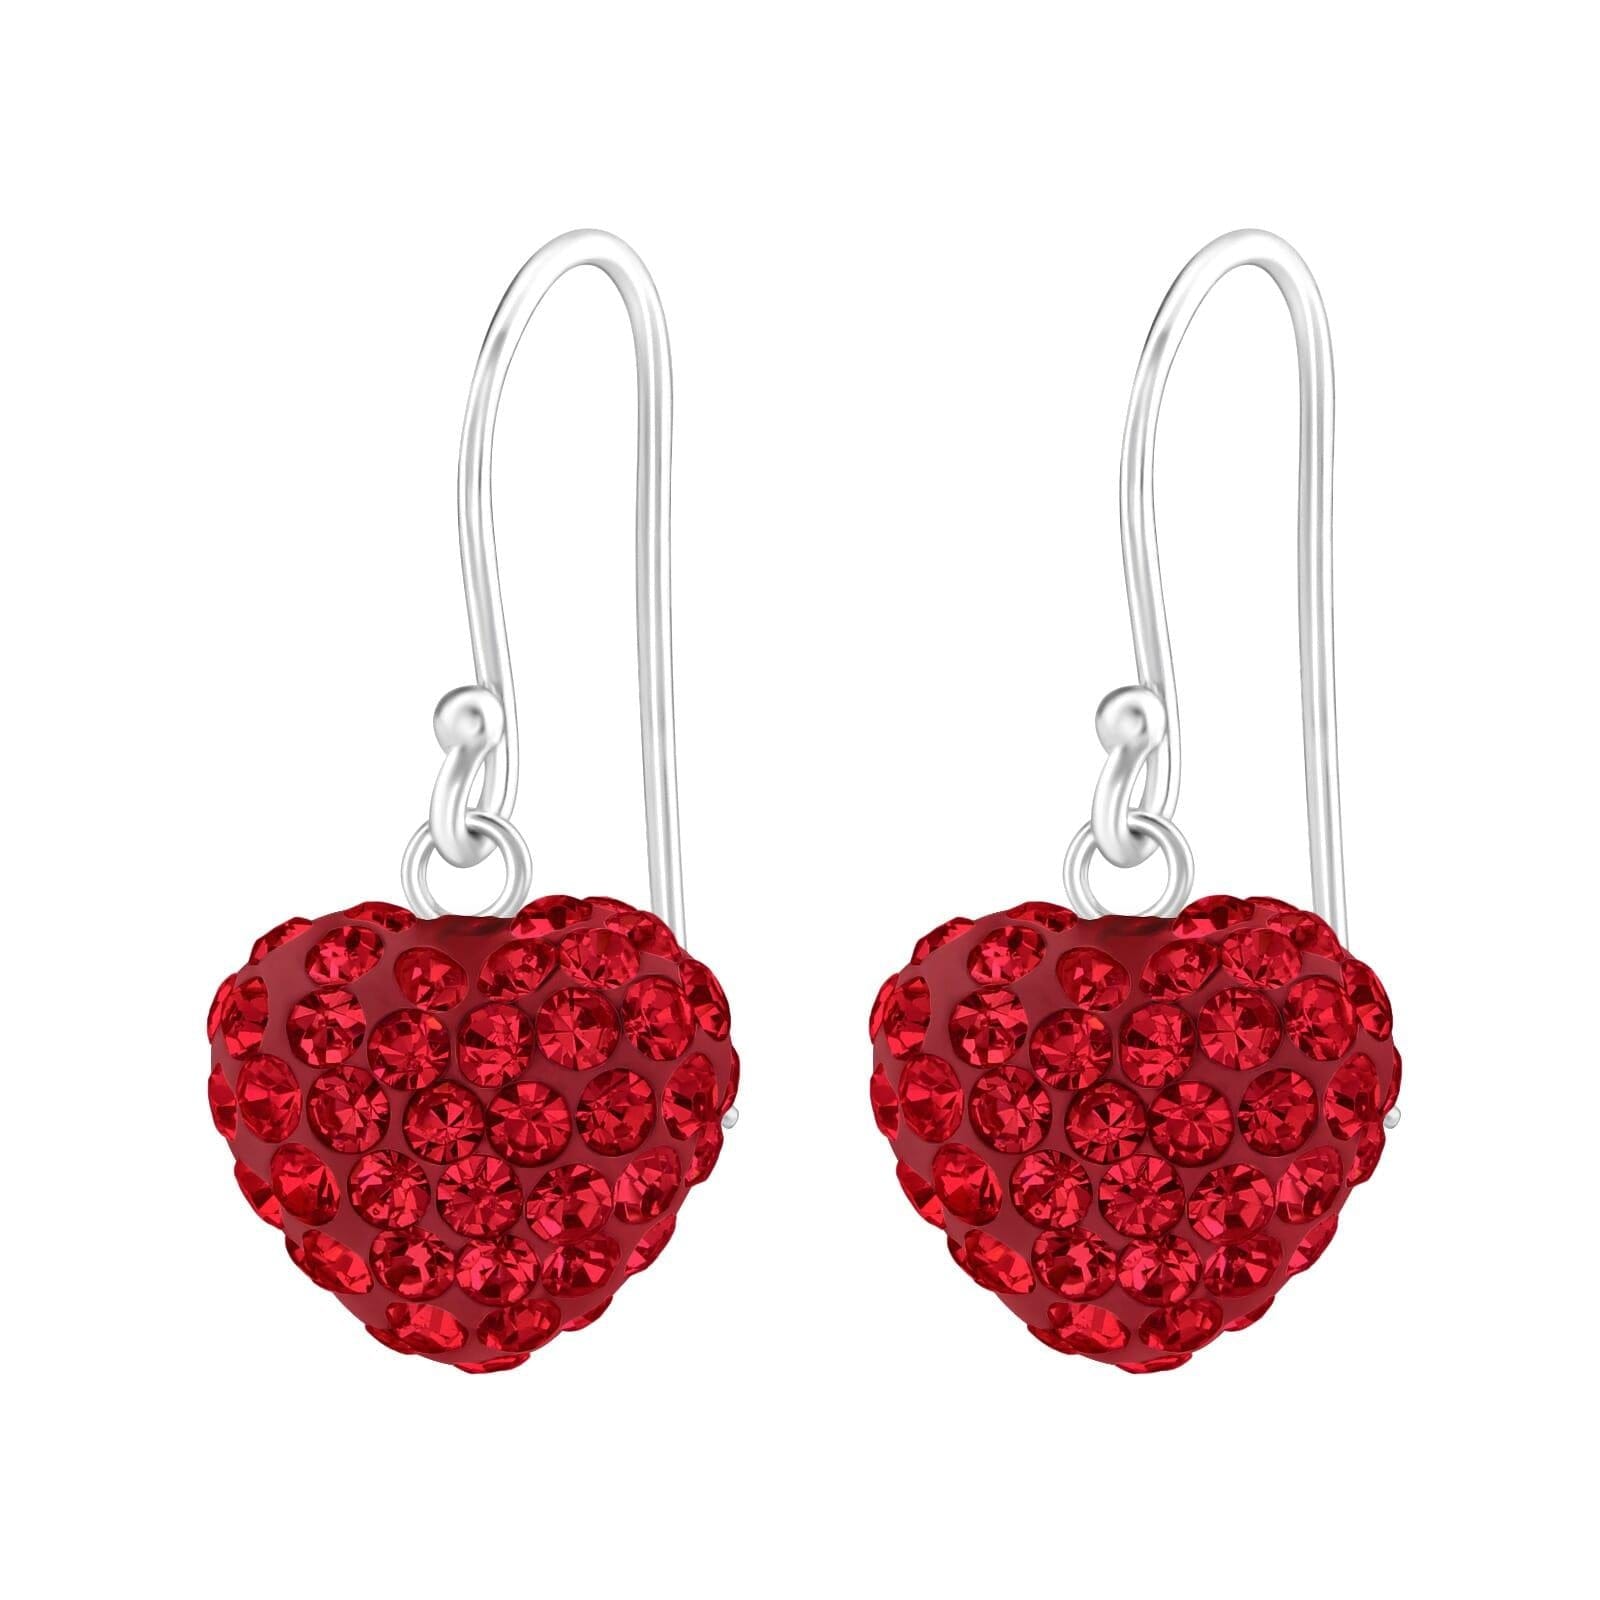 Asfour 925 Sterling Silver Earring with Round Zicron Stone, Red